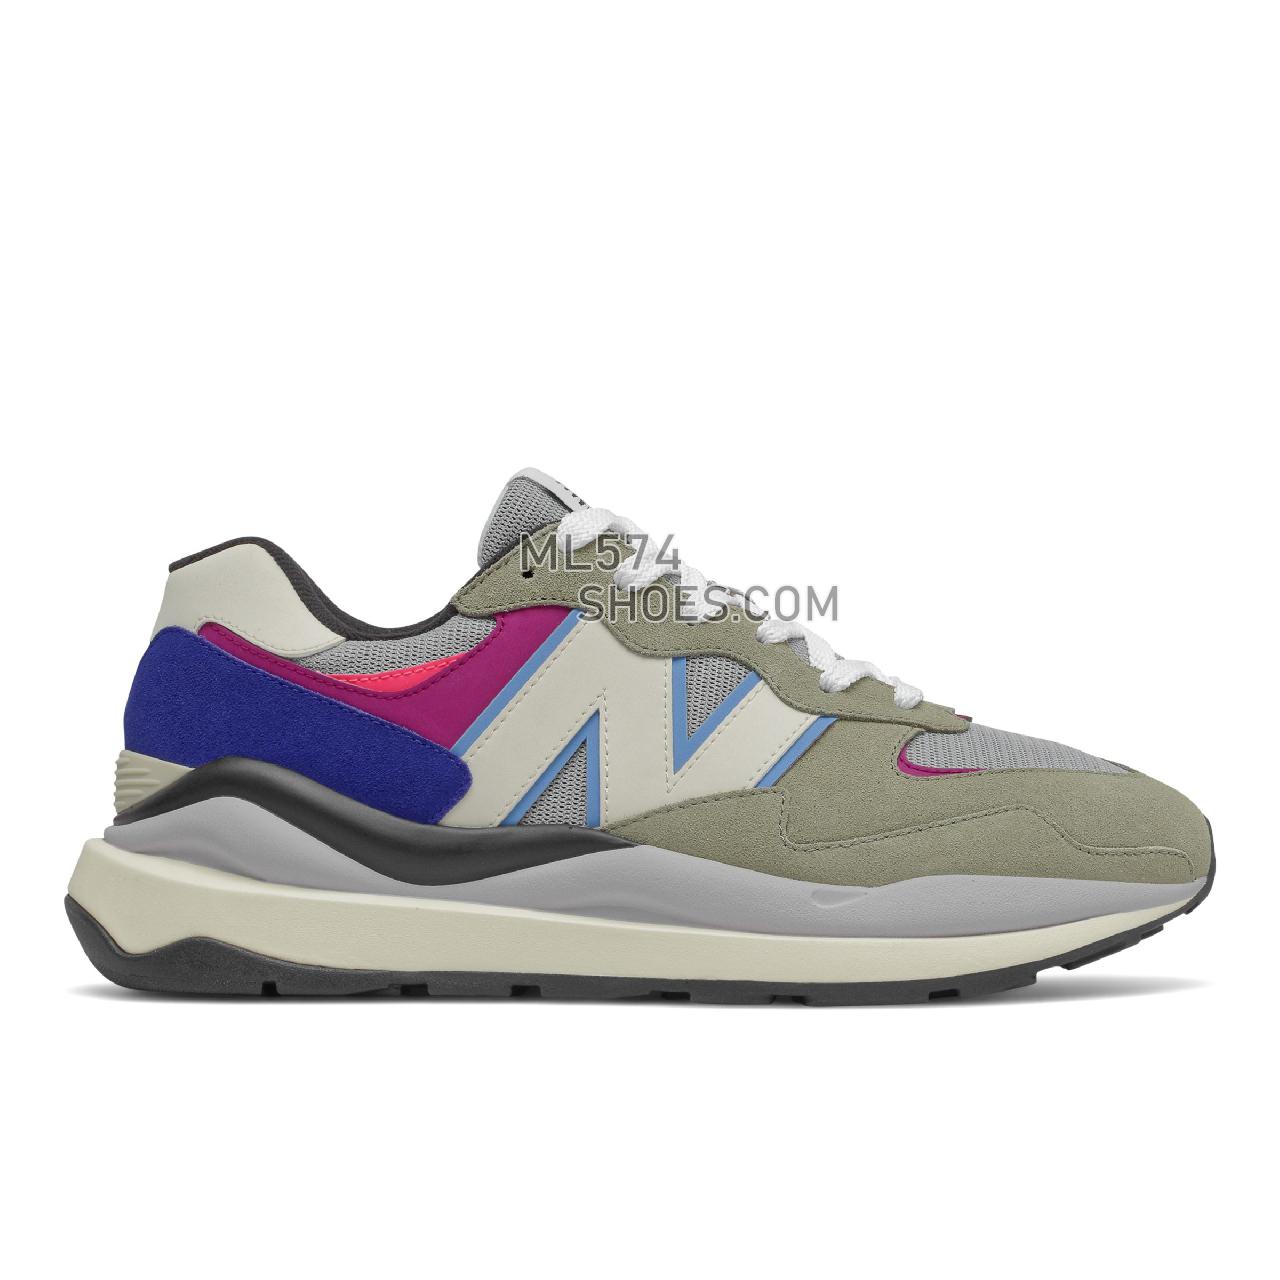 New Balance 57/40 - Men's Sport Style Sneakers - Grey with Pink Zing - M5740DD1